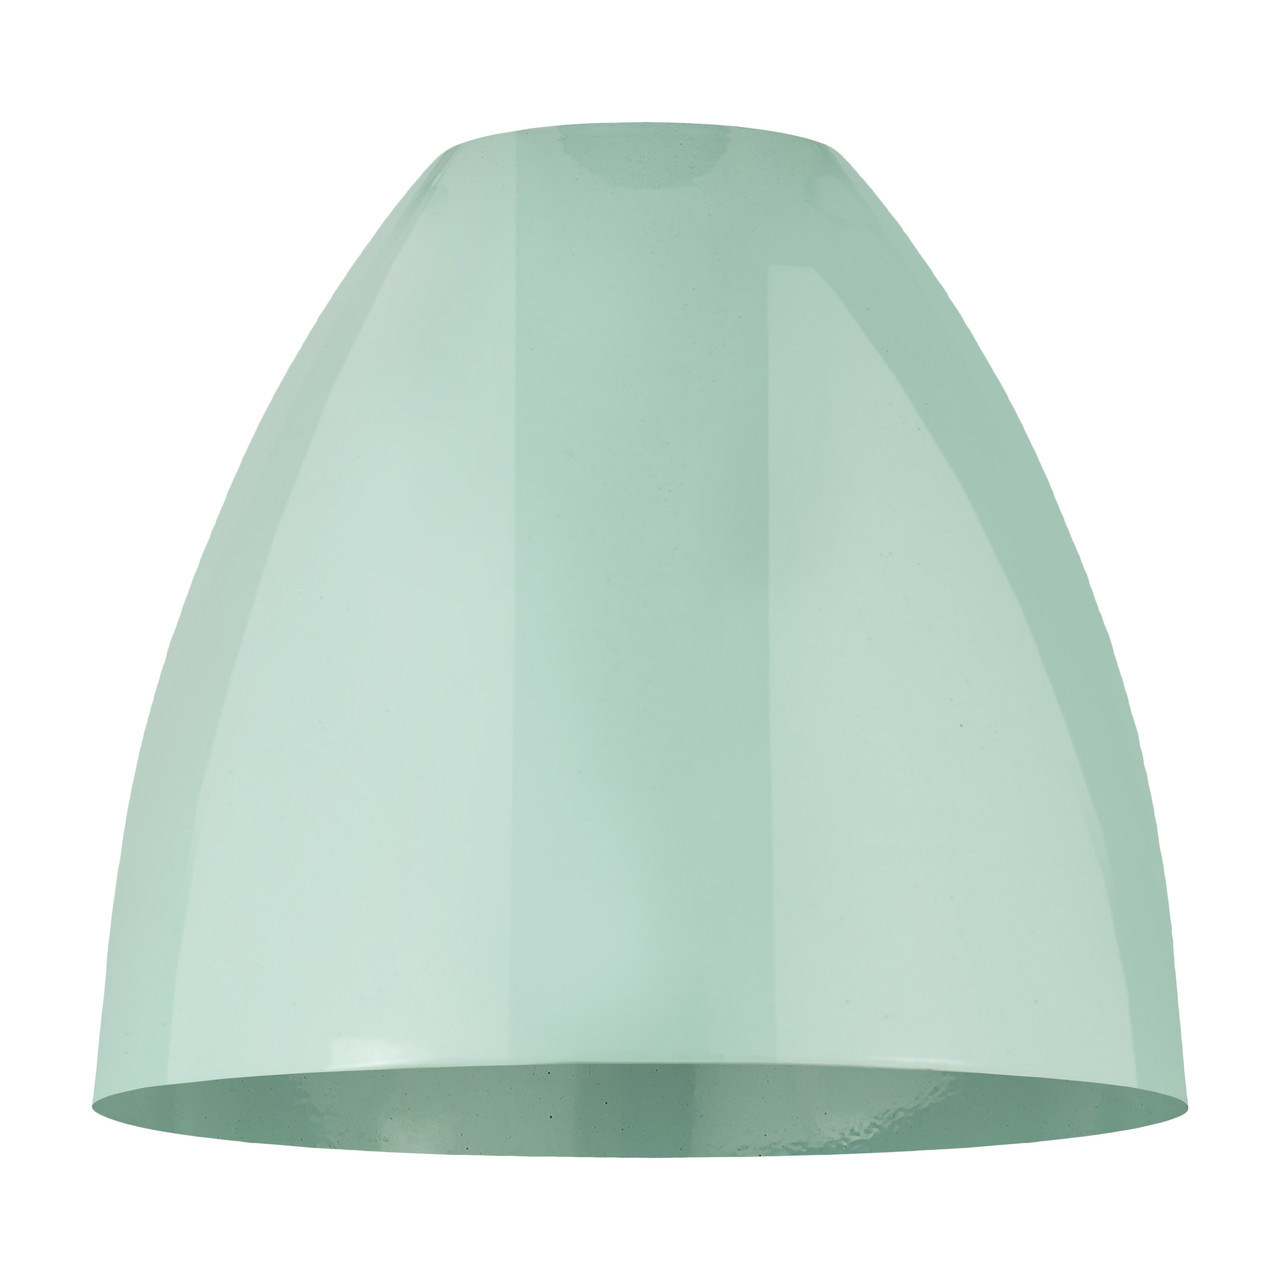 INNOVATIONS MBD-9-SF Plymouth Dome Light 9 inch Seafoam Metal Shade